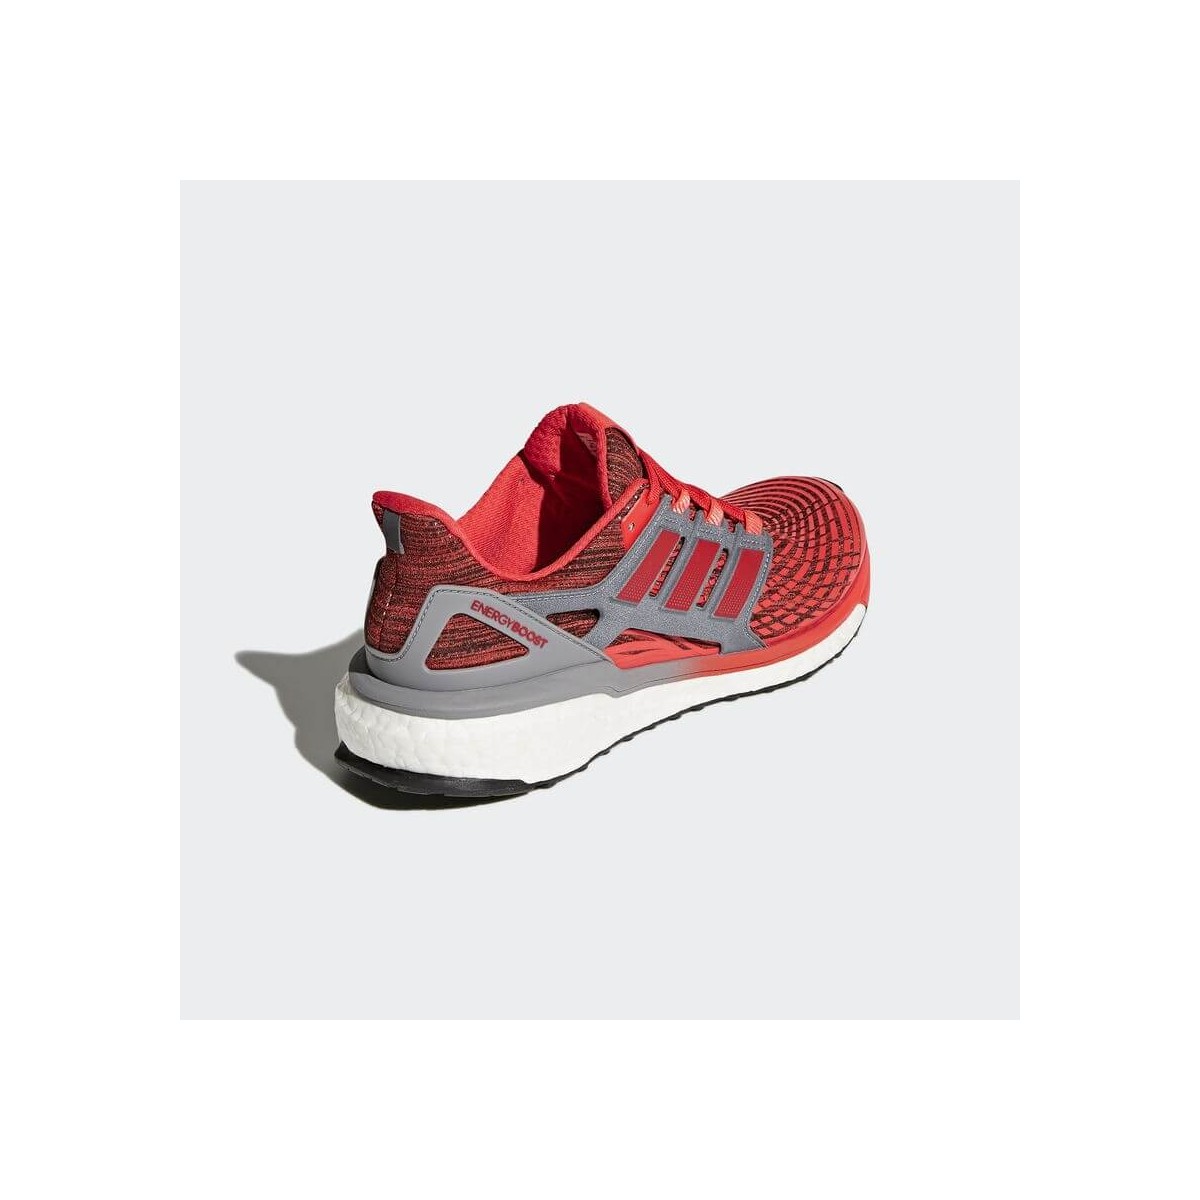 Adidas Energy Boost men's SS18 red and gray